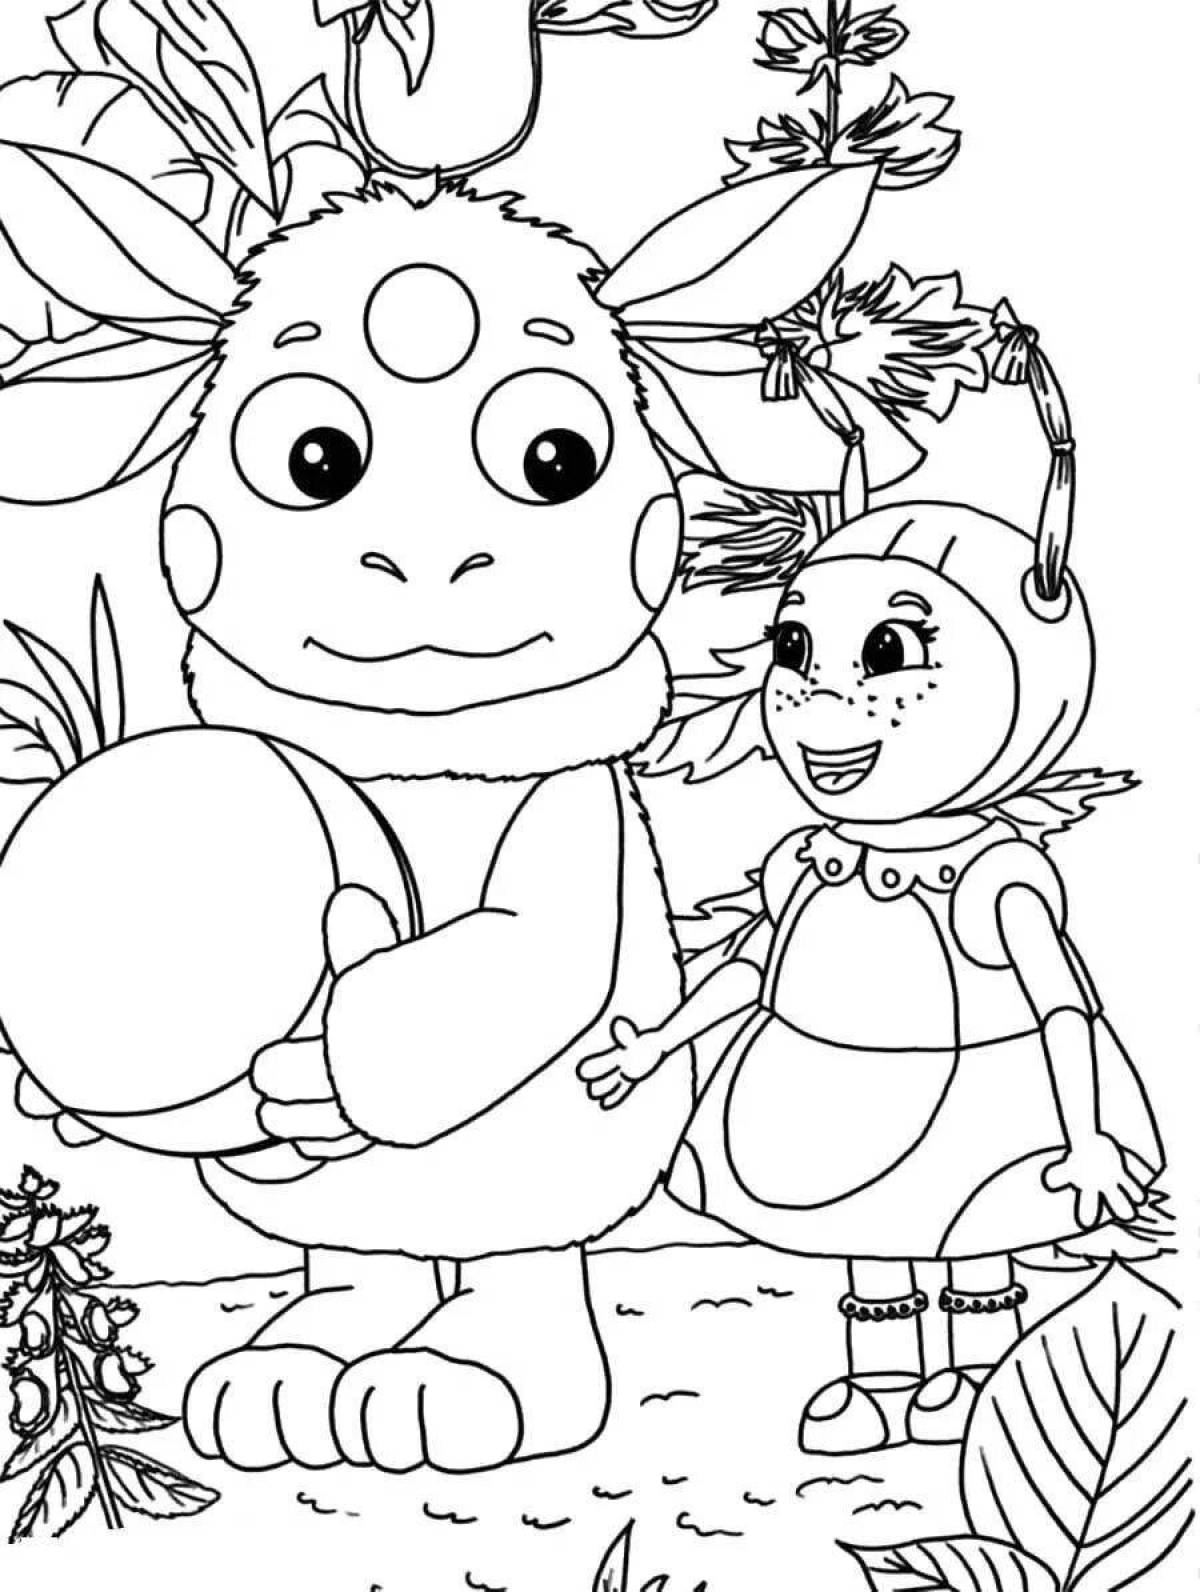 Fabulous coloring book for 5-6 year old cartoon kids